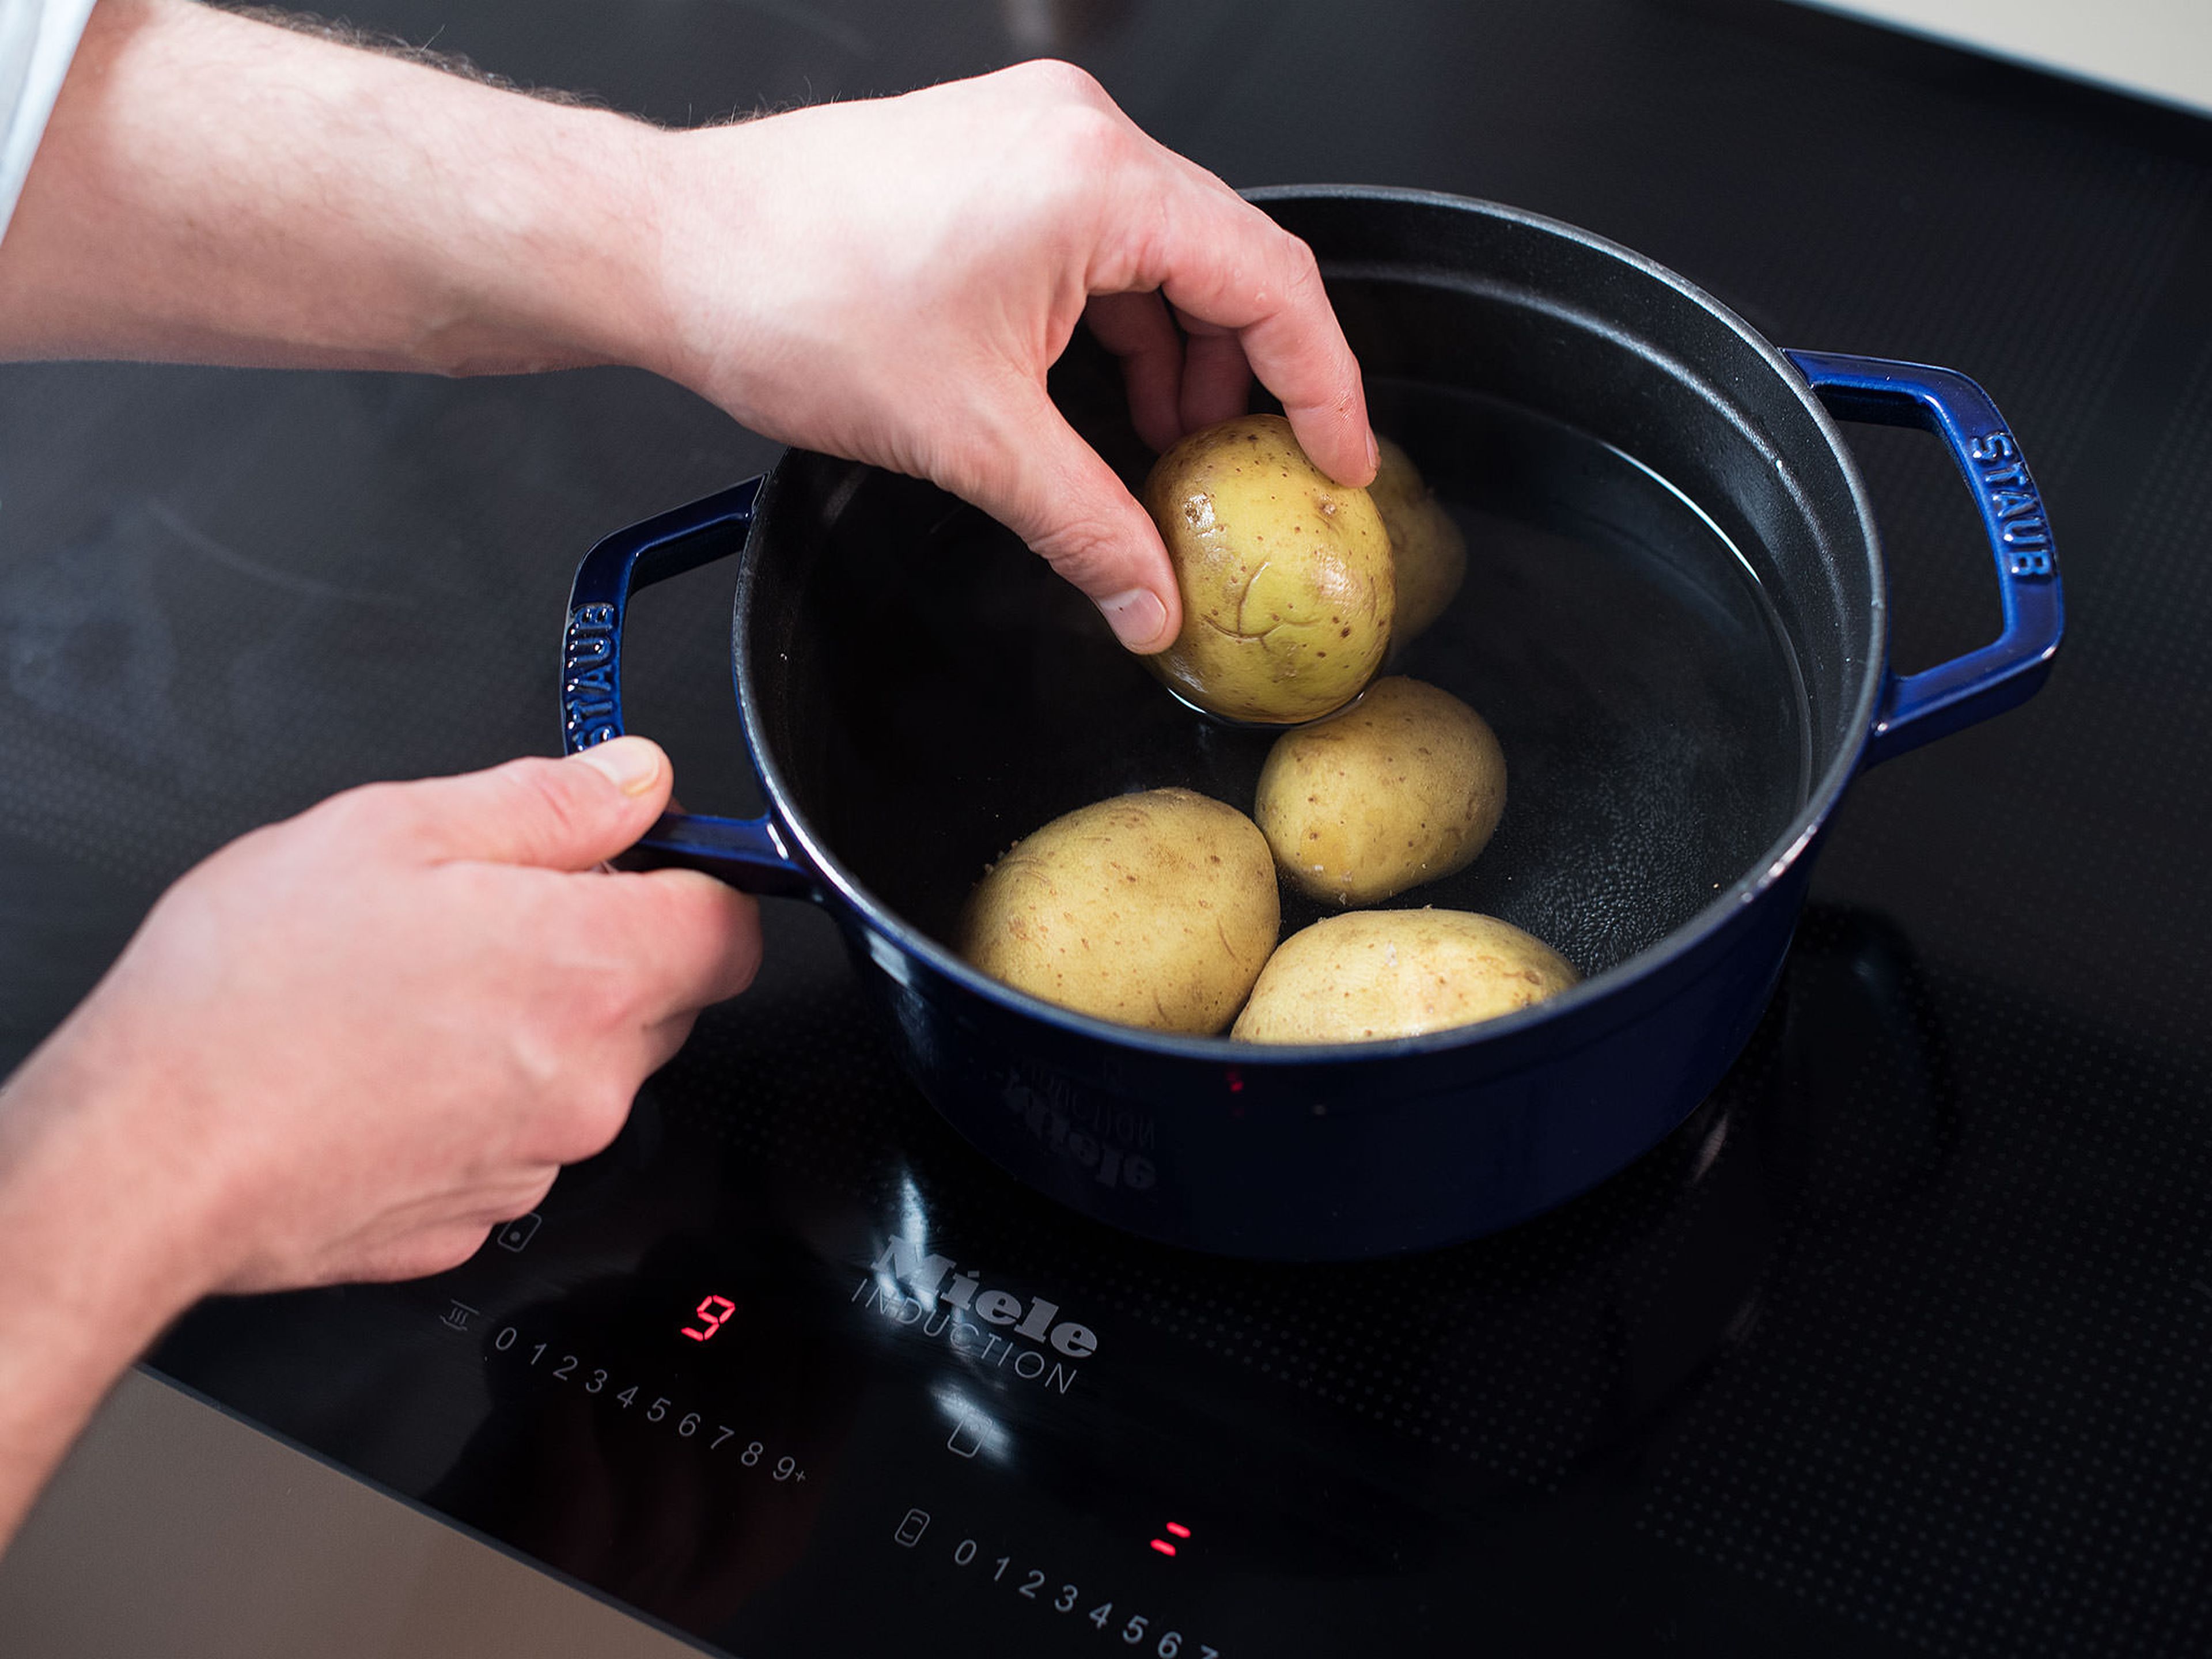 Bring a pot of water to a boil. Add potatoes and cook for approx. 20 min., or until knife-tender.